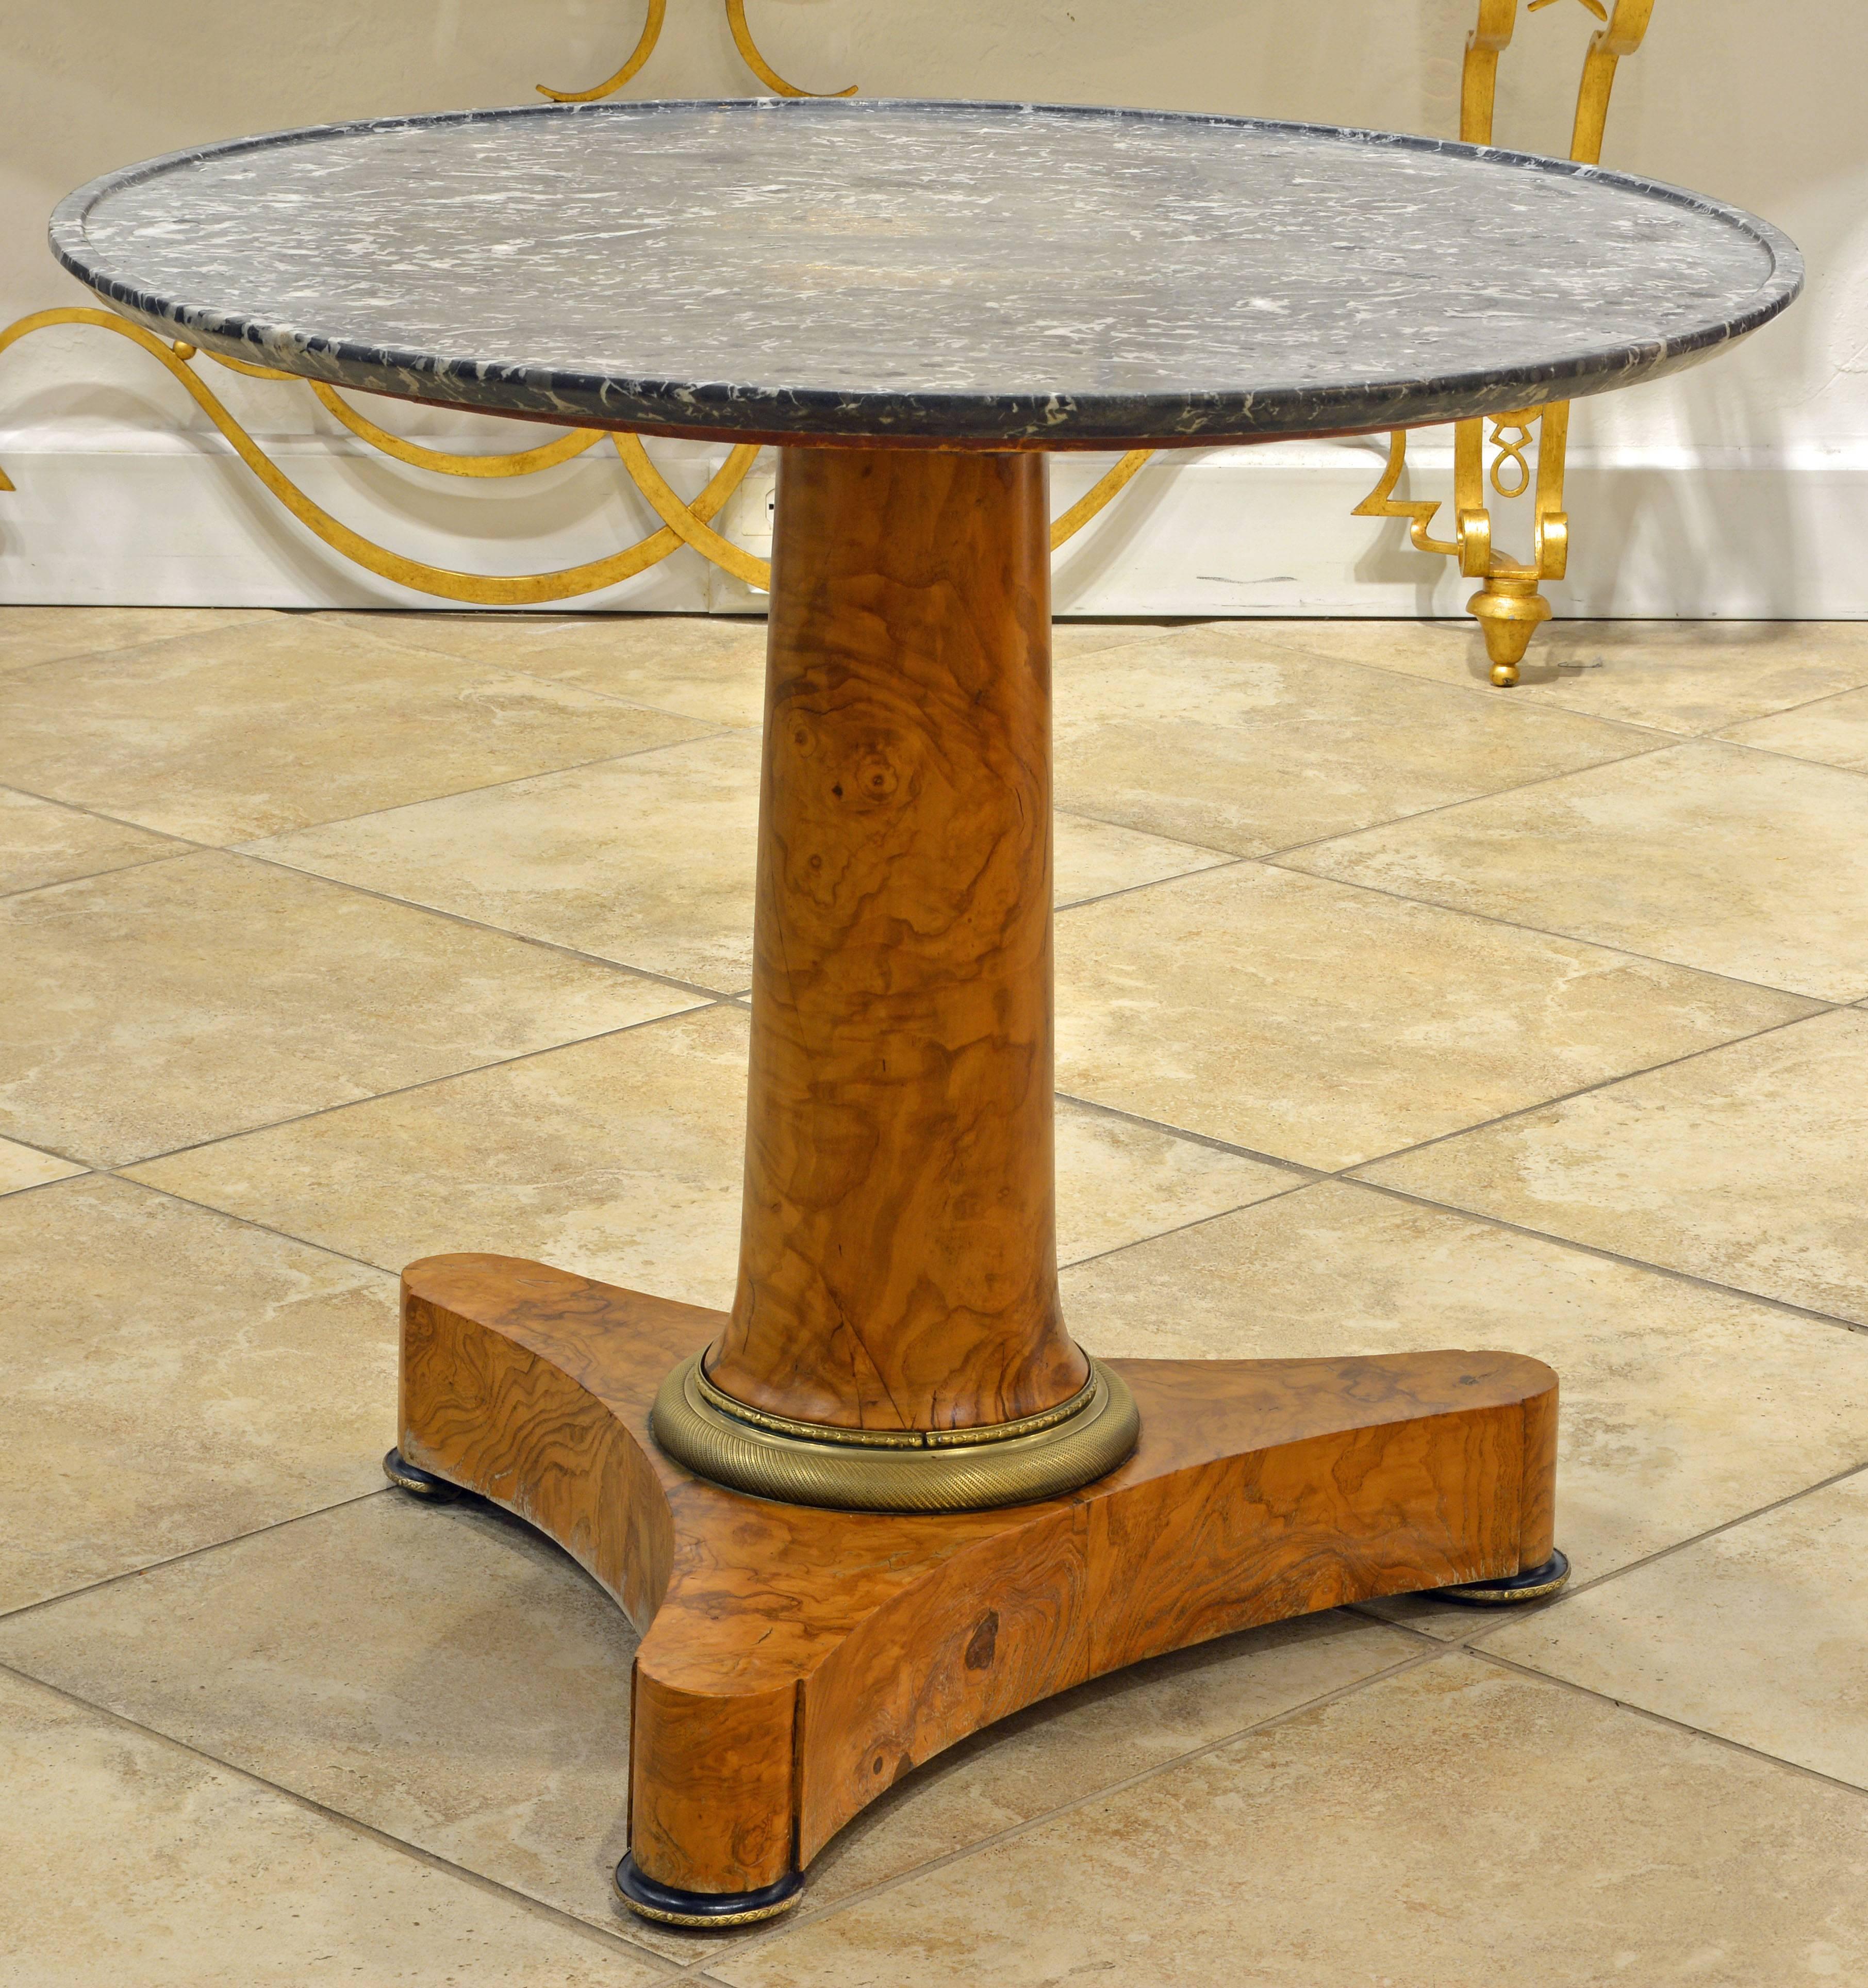 An iconic and distinguished design characterizes this table featuring a black/gray/white dish-carved marble top supported by a single conical stem and gilt bronze foot resting on a three pointed base with gilt bronze and ebonized feet.